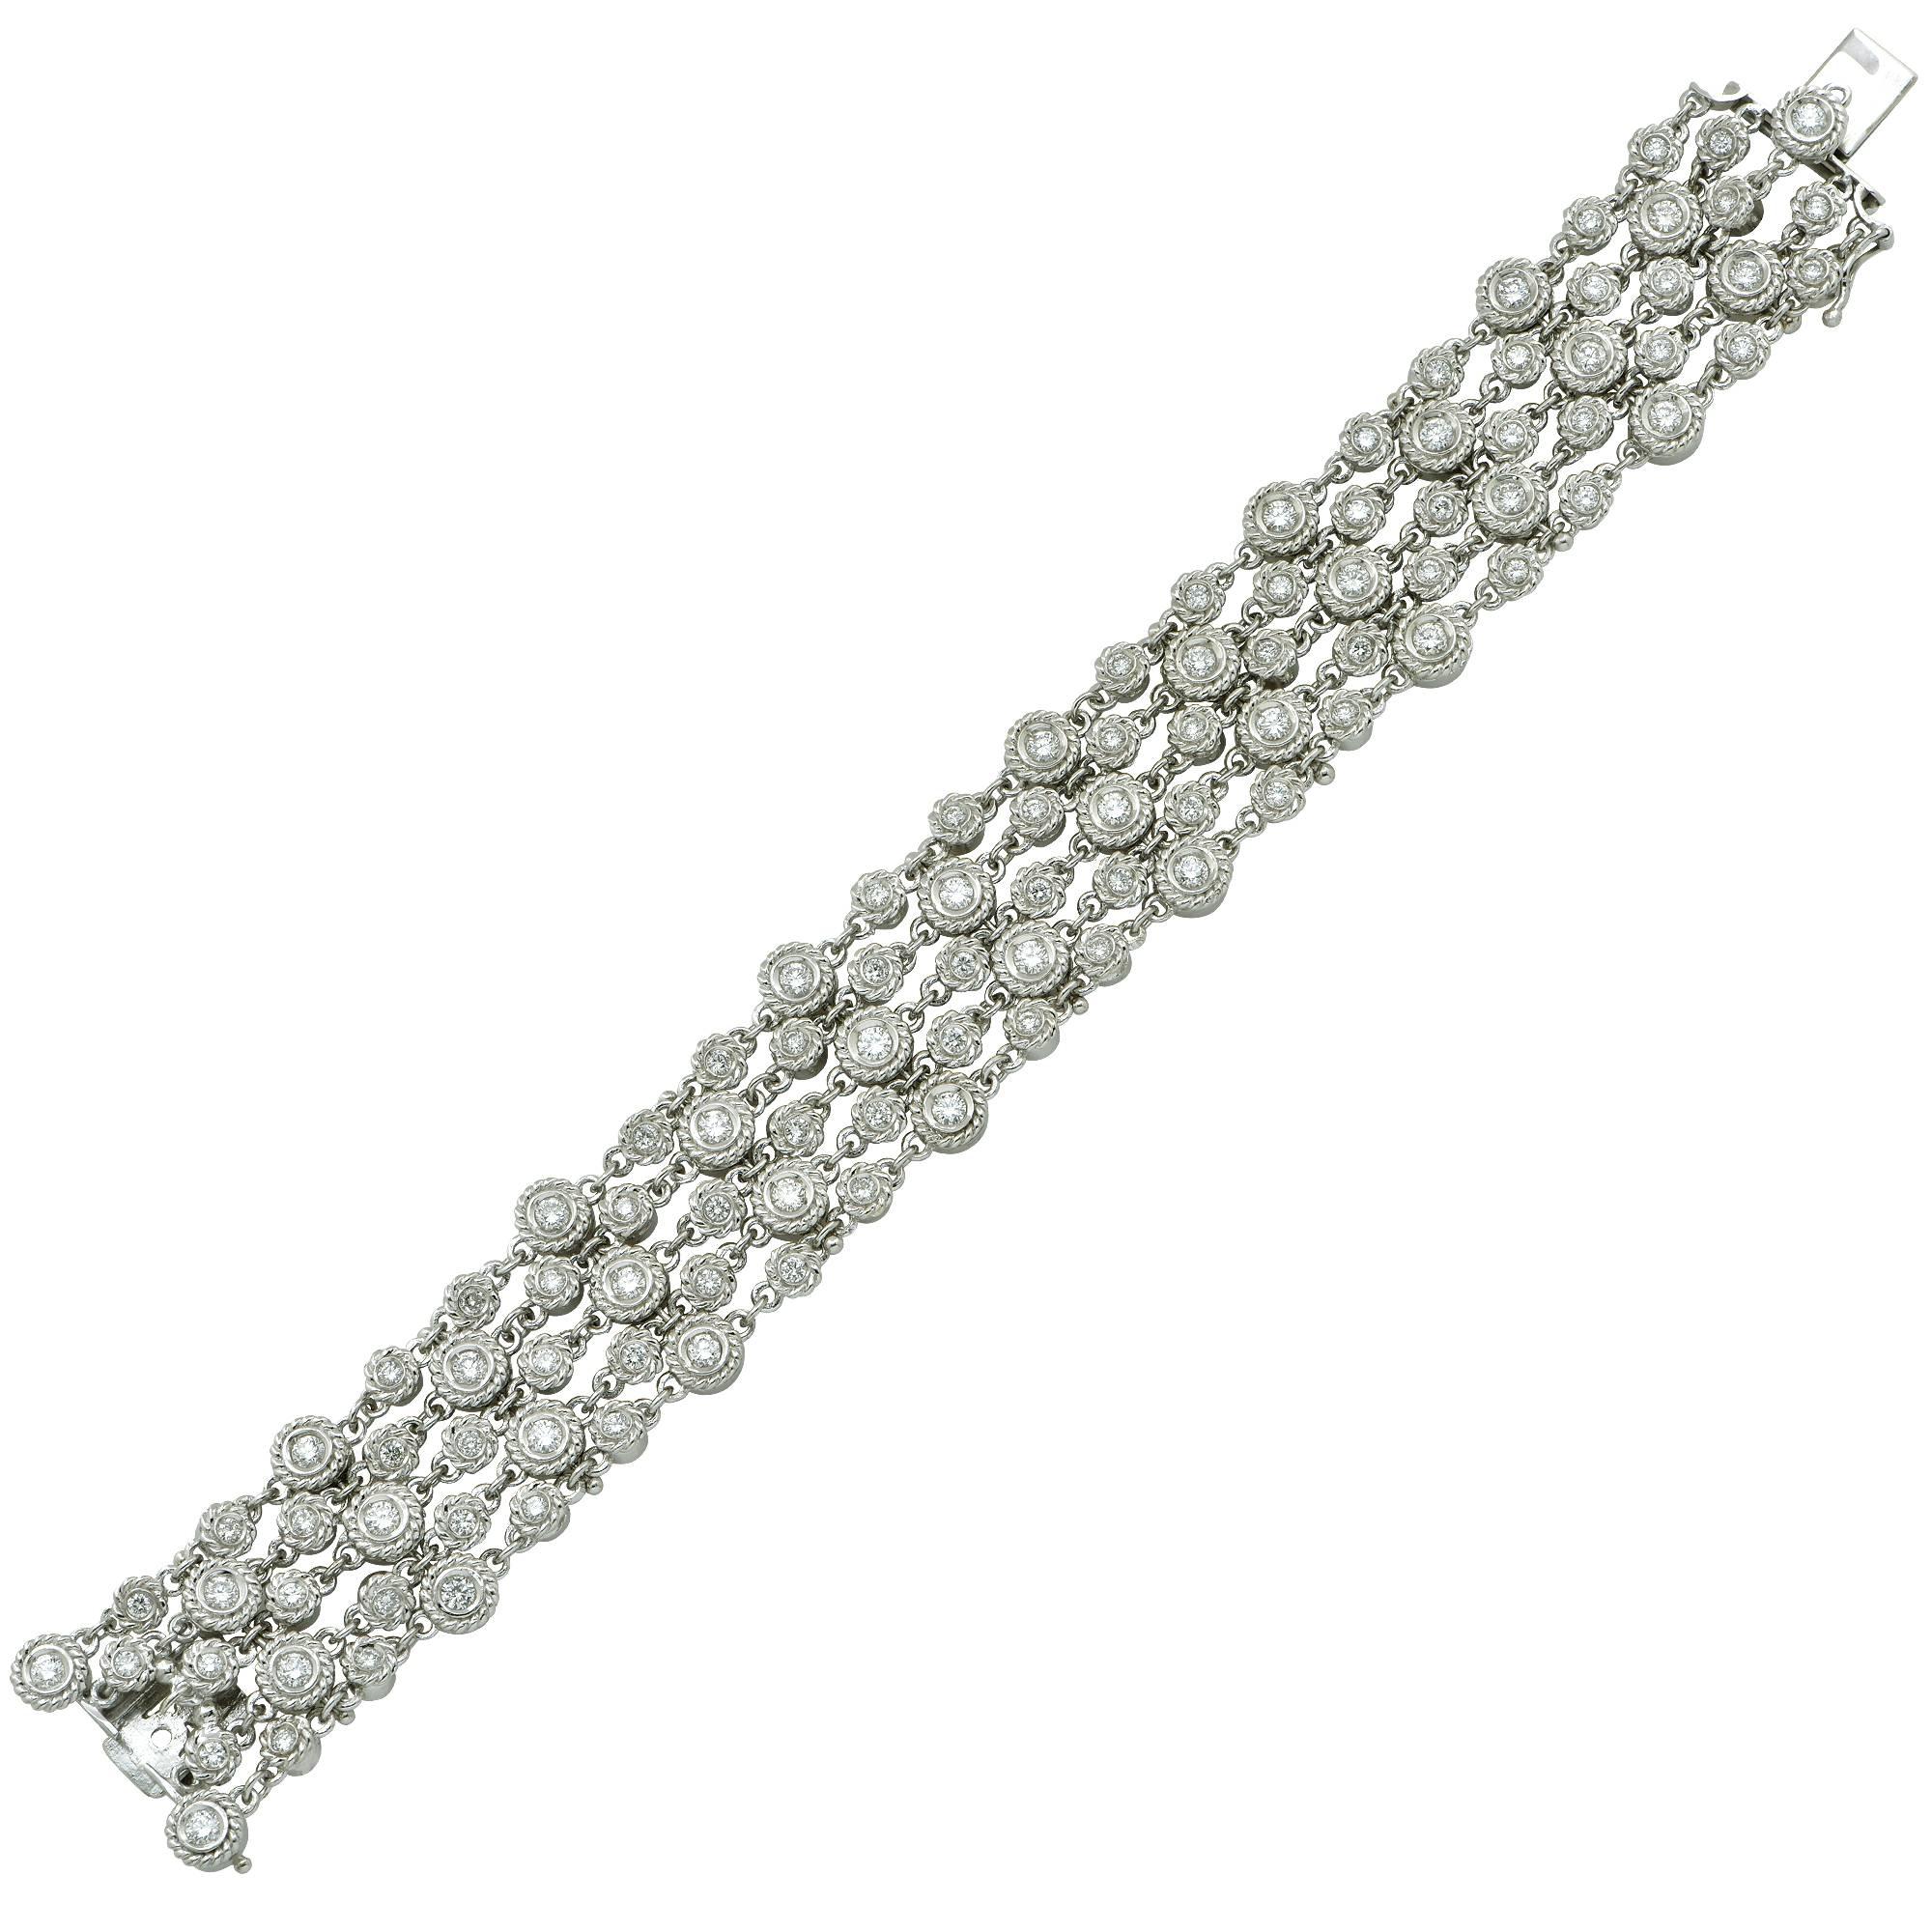 18k white gold flexible bracelet featuring 105 round brilliant cut diamonds weighing approximately 4.20cts total, G color VS clarity.

The bracelet measures 7.50 inches in length.
It is stamped and/or tested as 18k gold.
The metal weight is 65.46